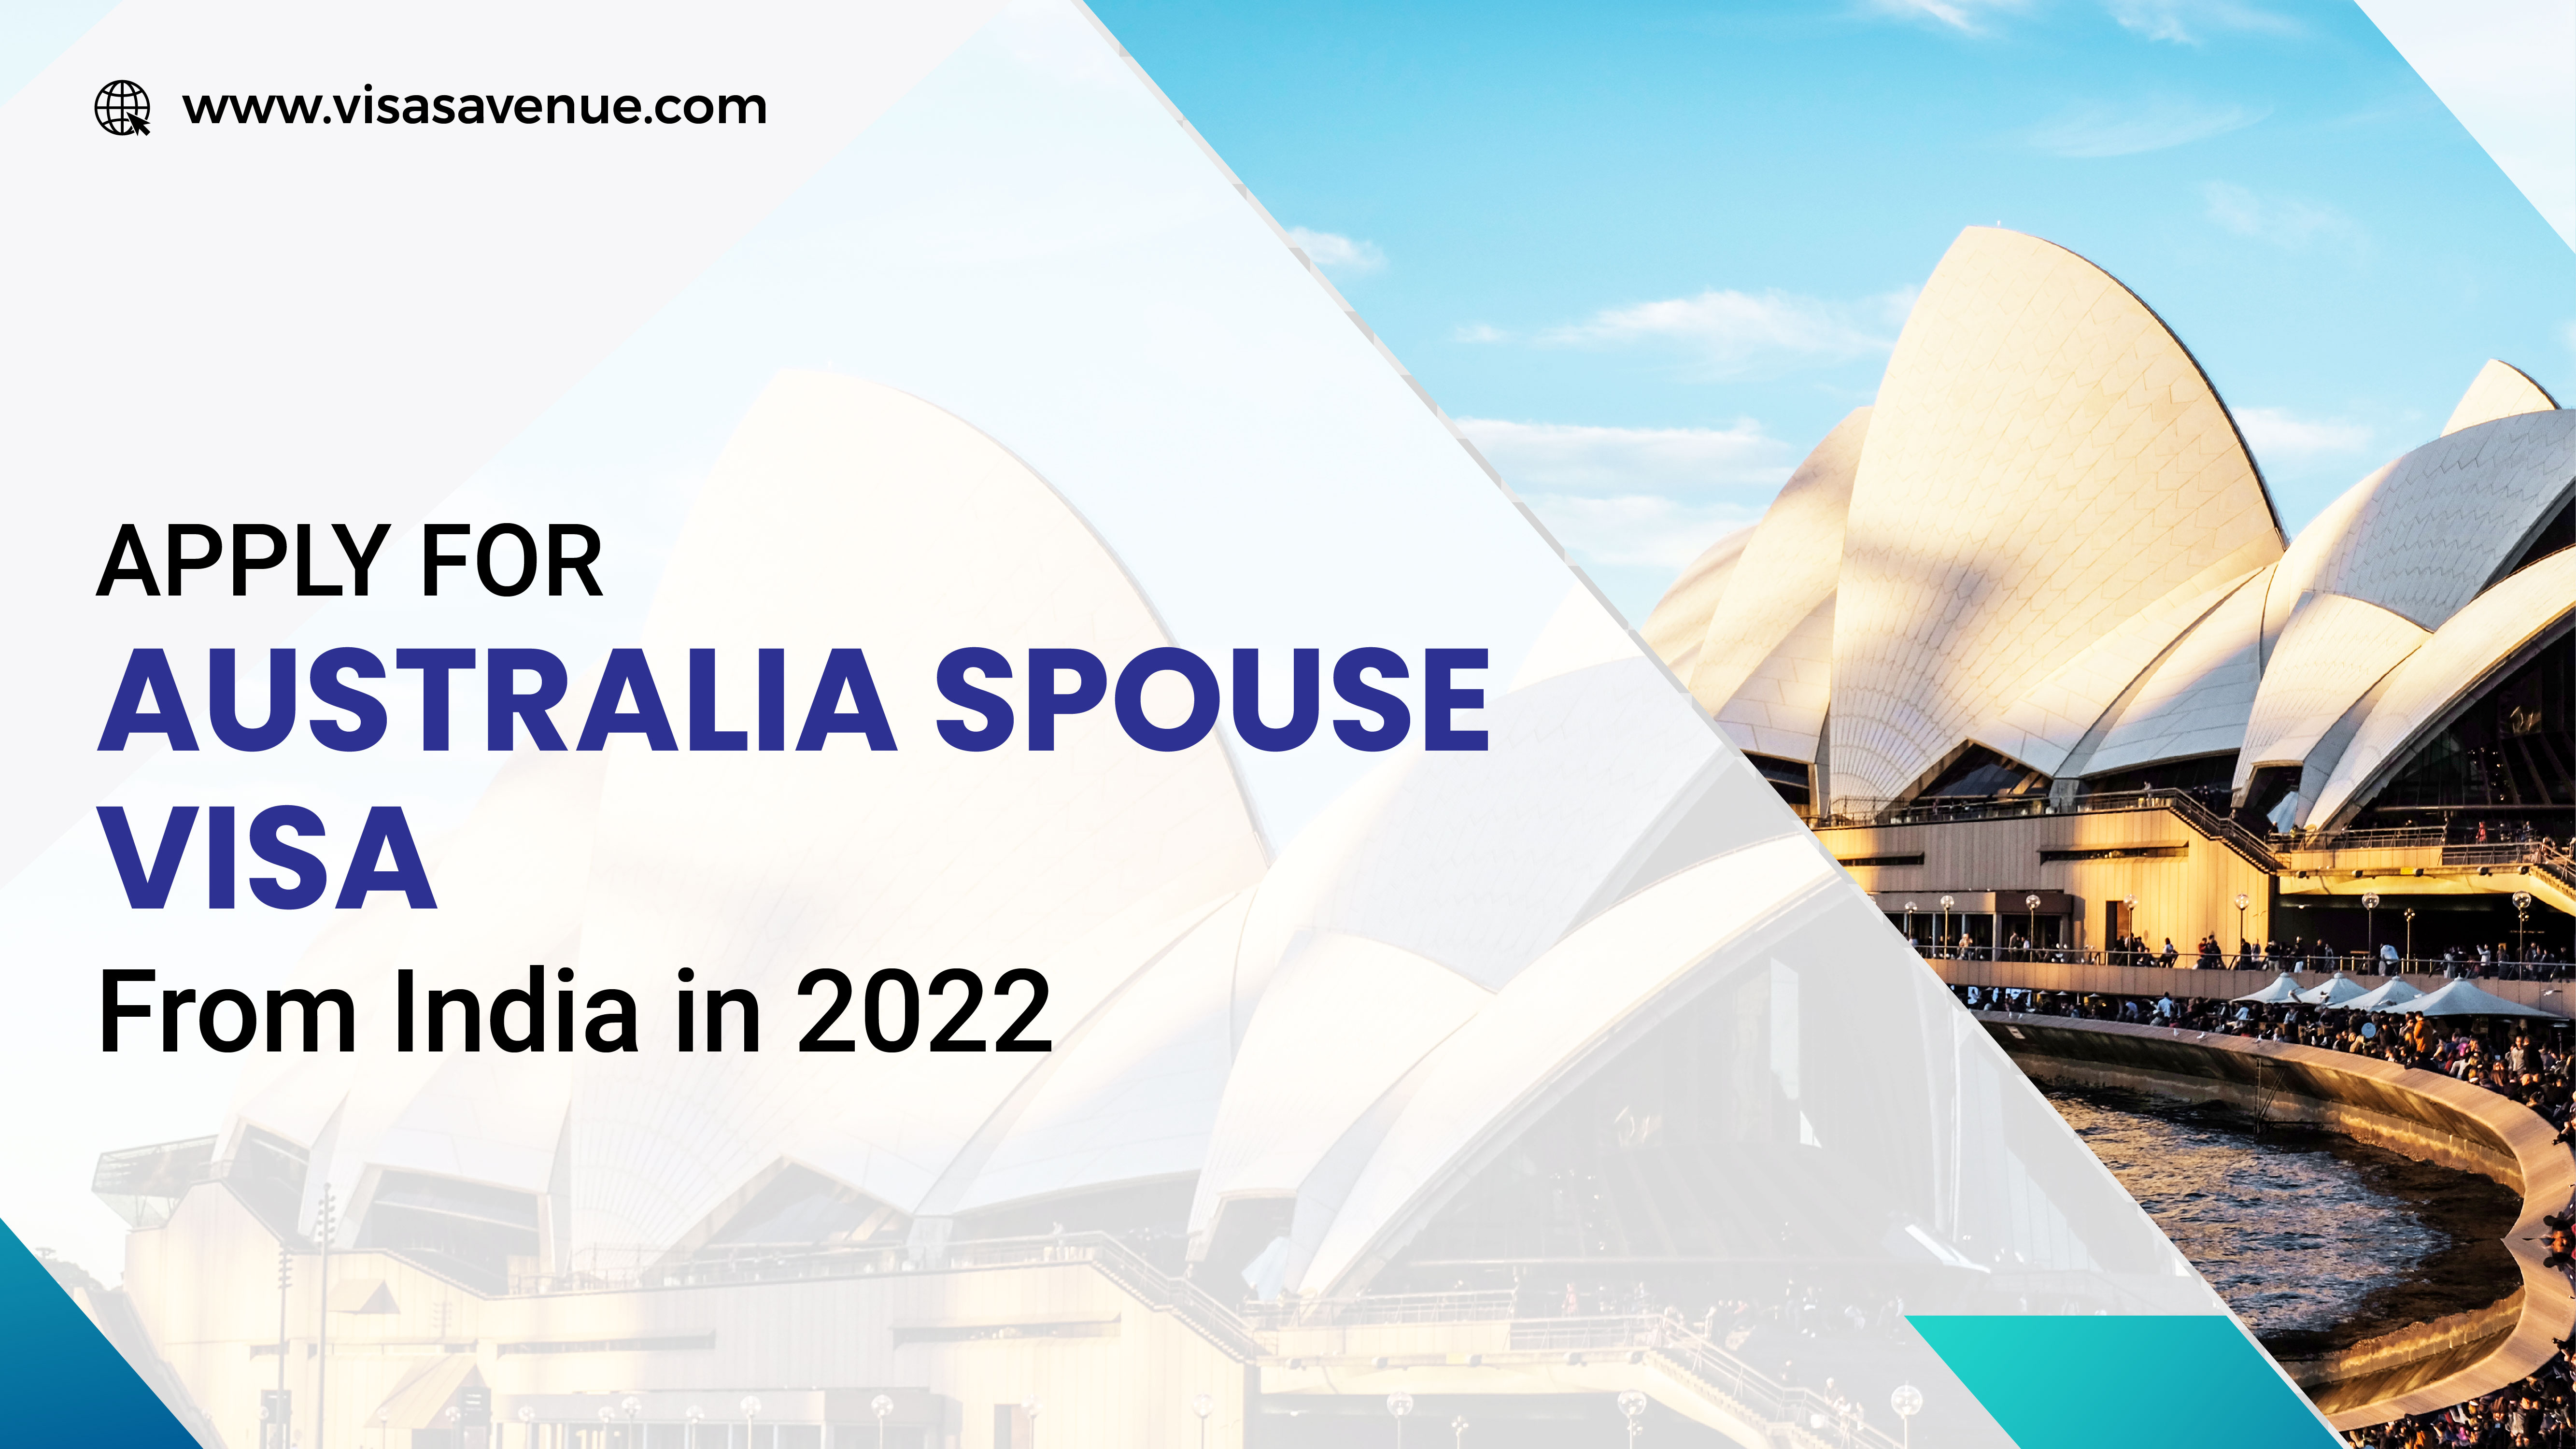 Apply for Australia Spouse Visa from India in 2022